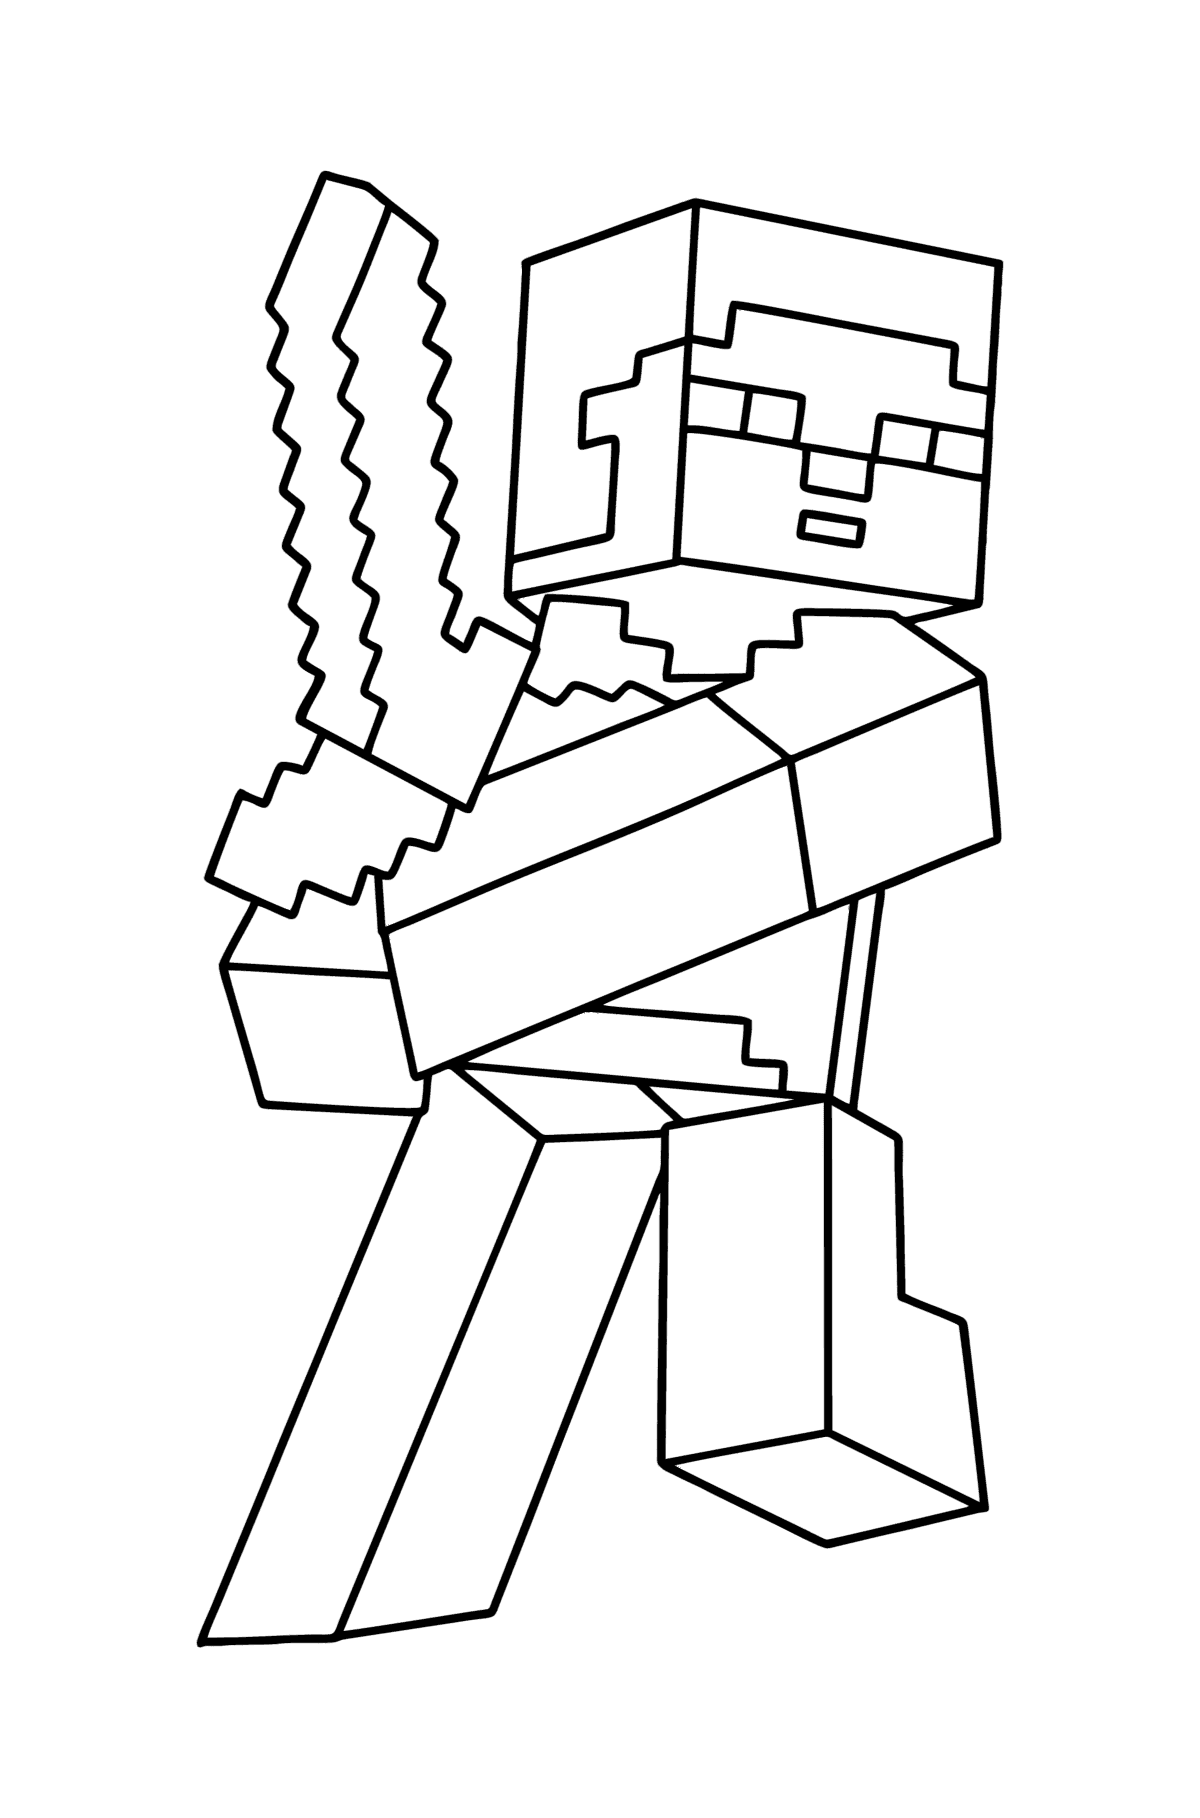 Minecraft Steve coloring page - Coloring Pages for Kids